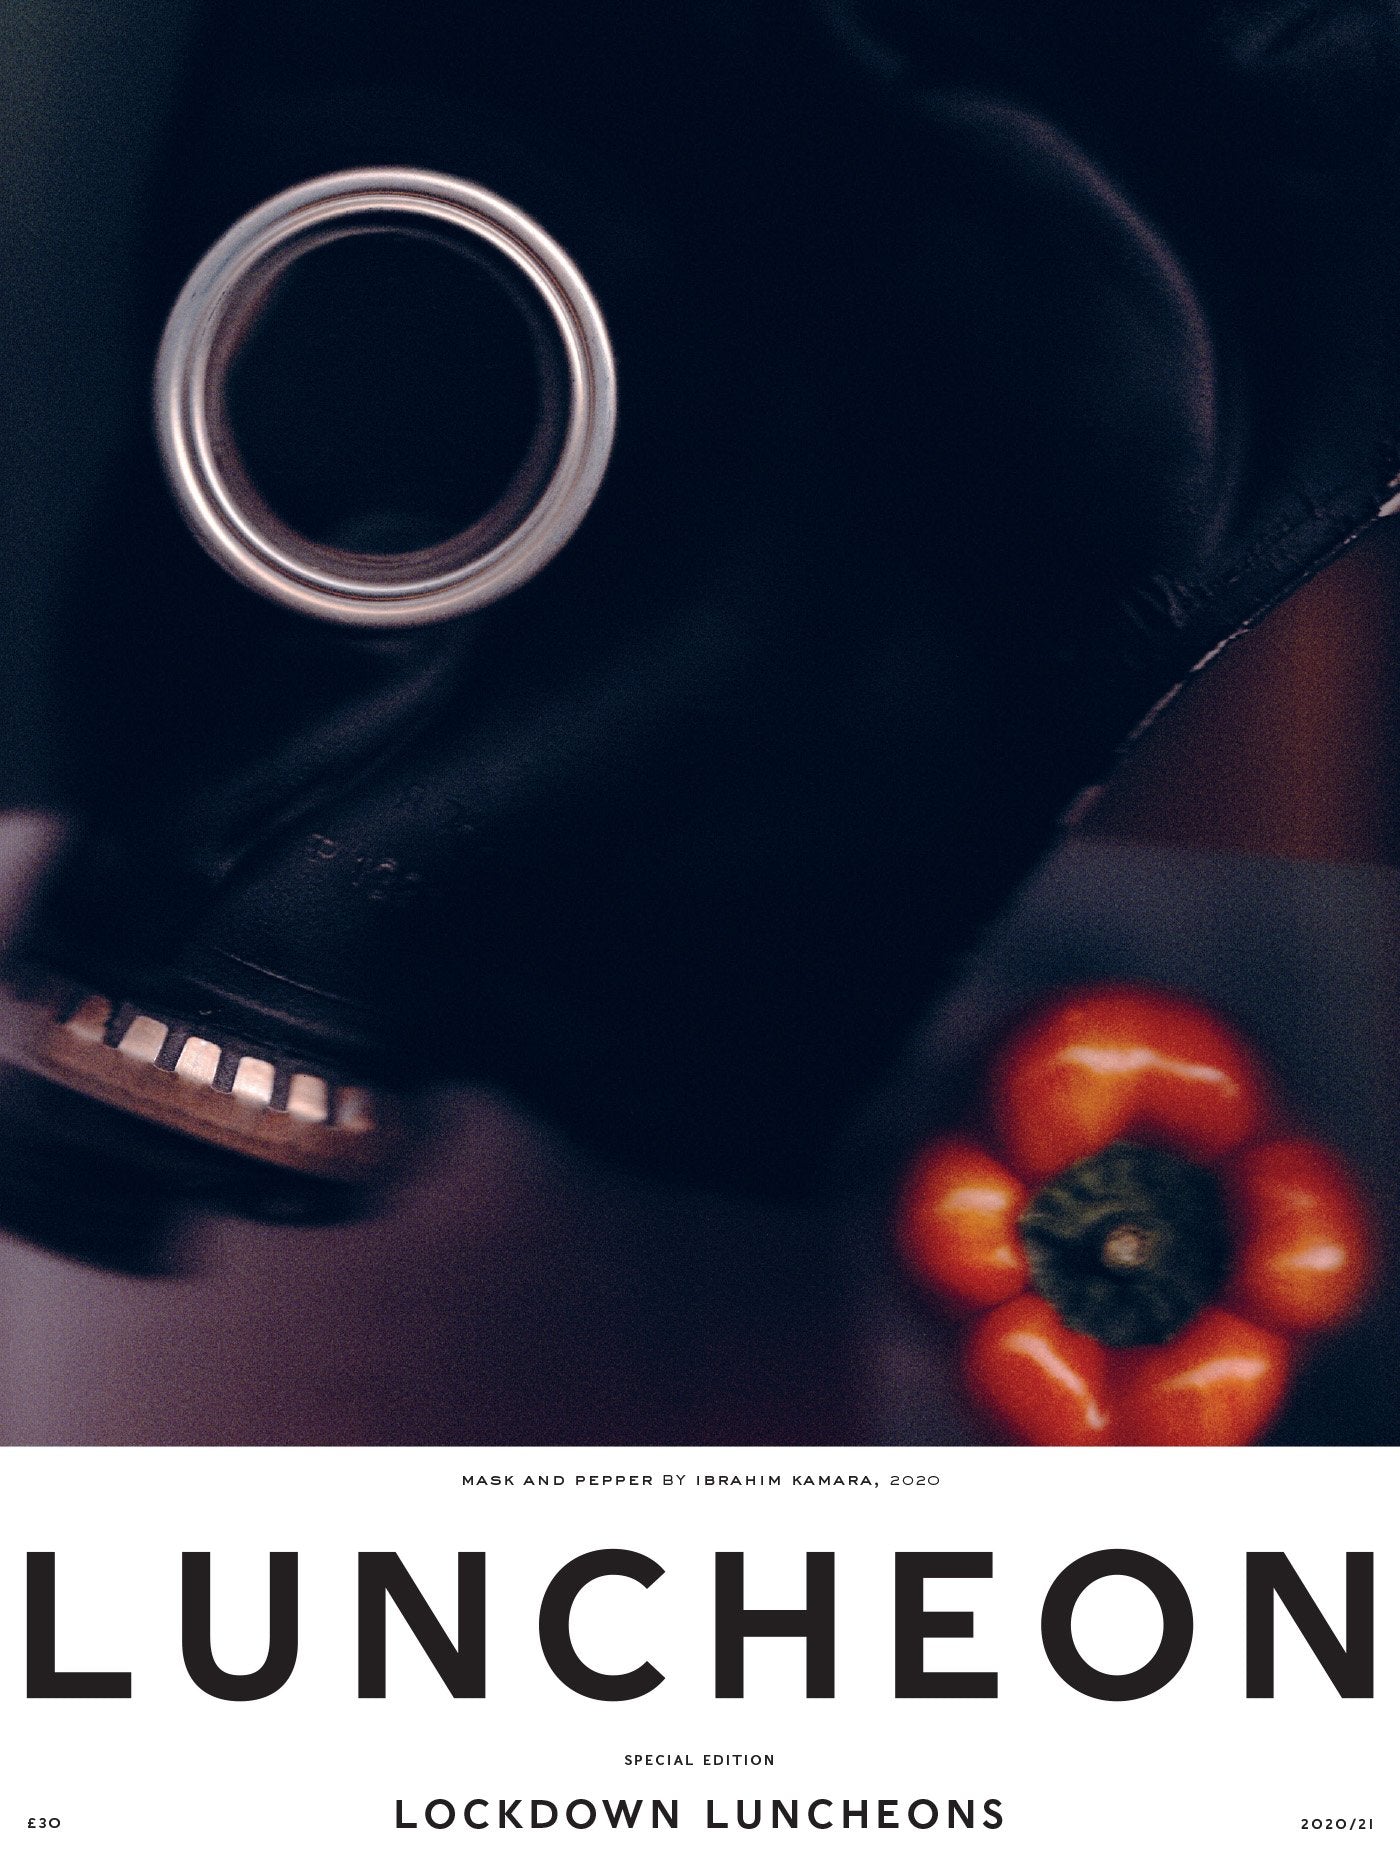 LUNCHEON - Magazine SPECIAL EDITION - RECIPE BOOK - (LOCKDOWN LUNCHEONS) view 3